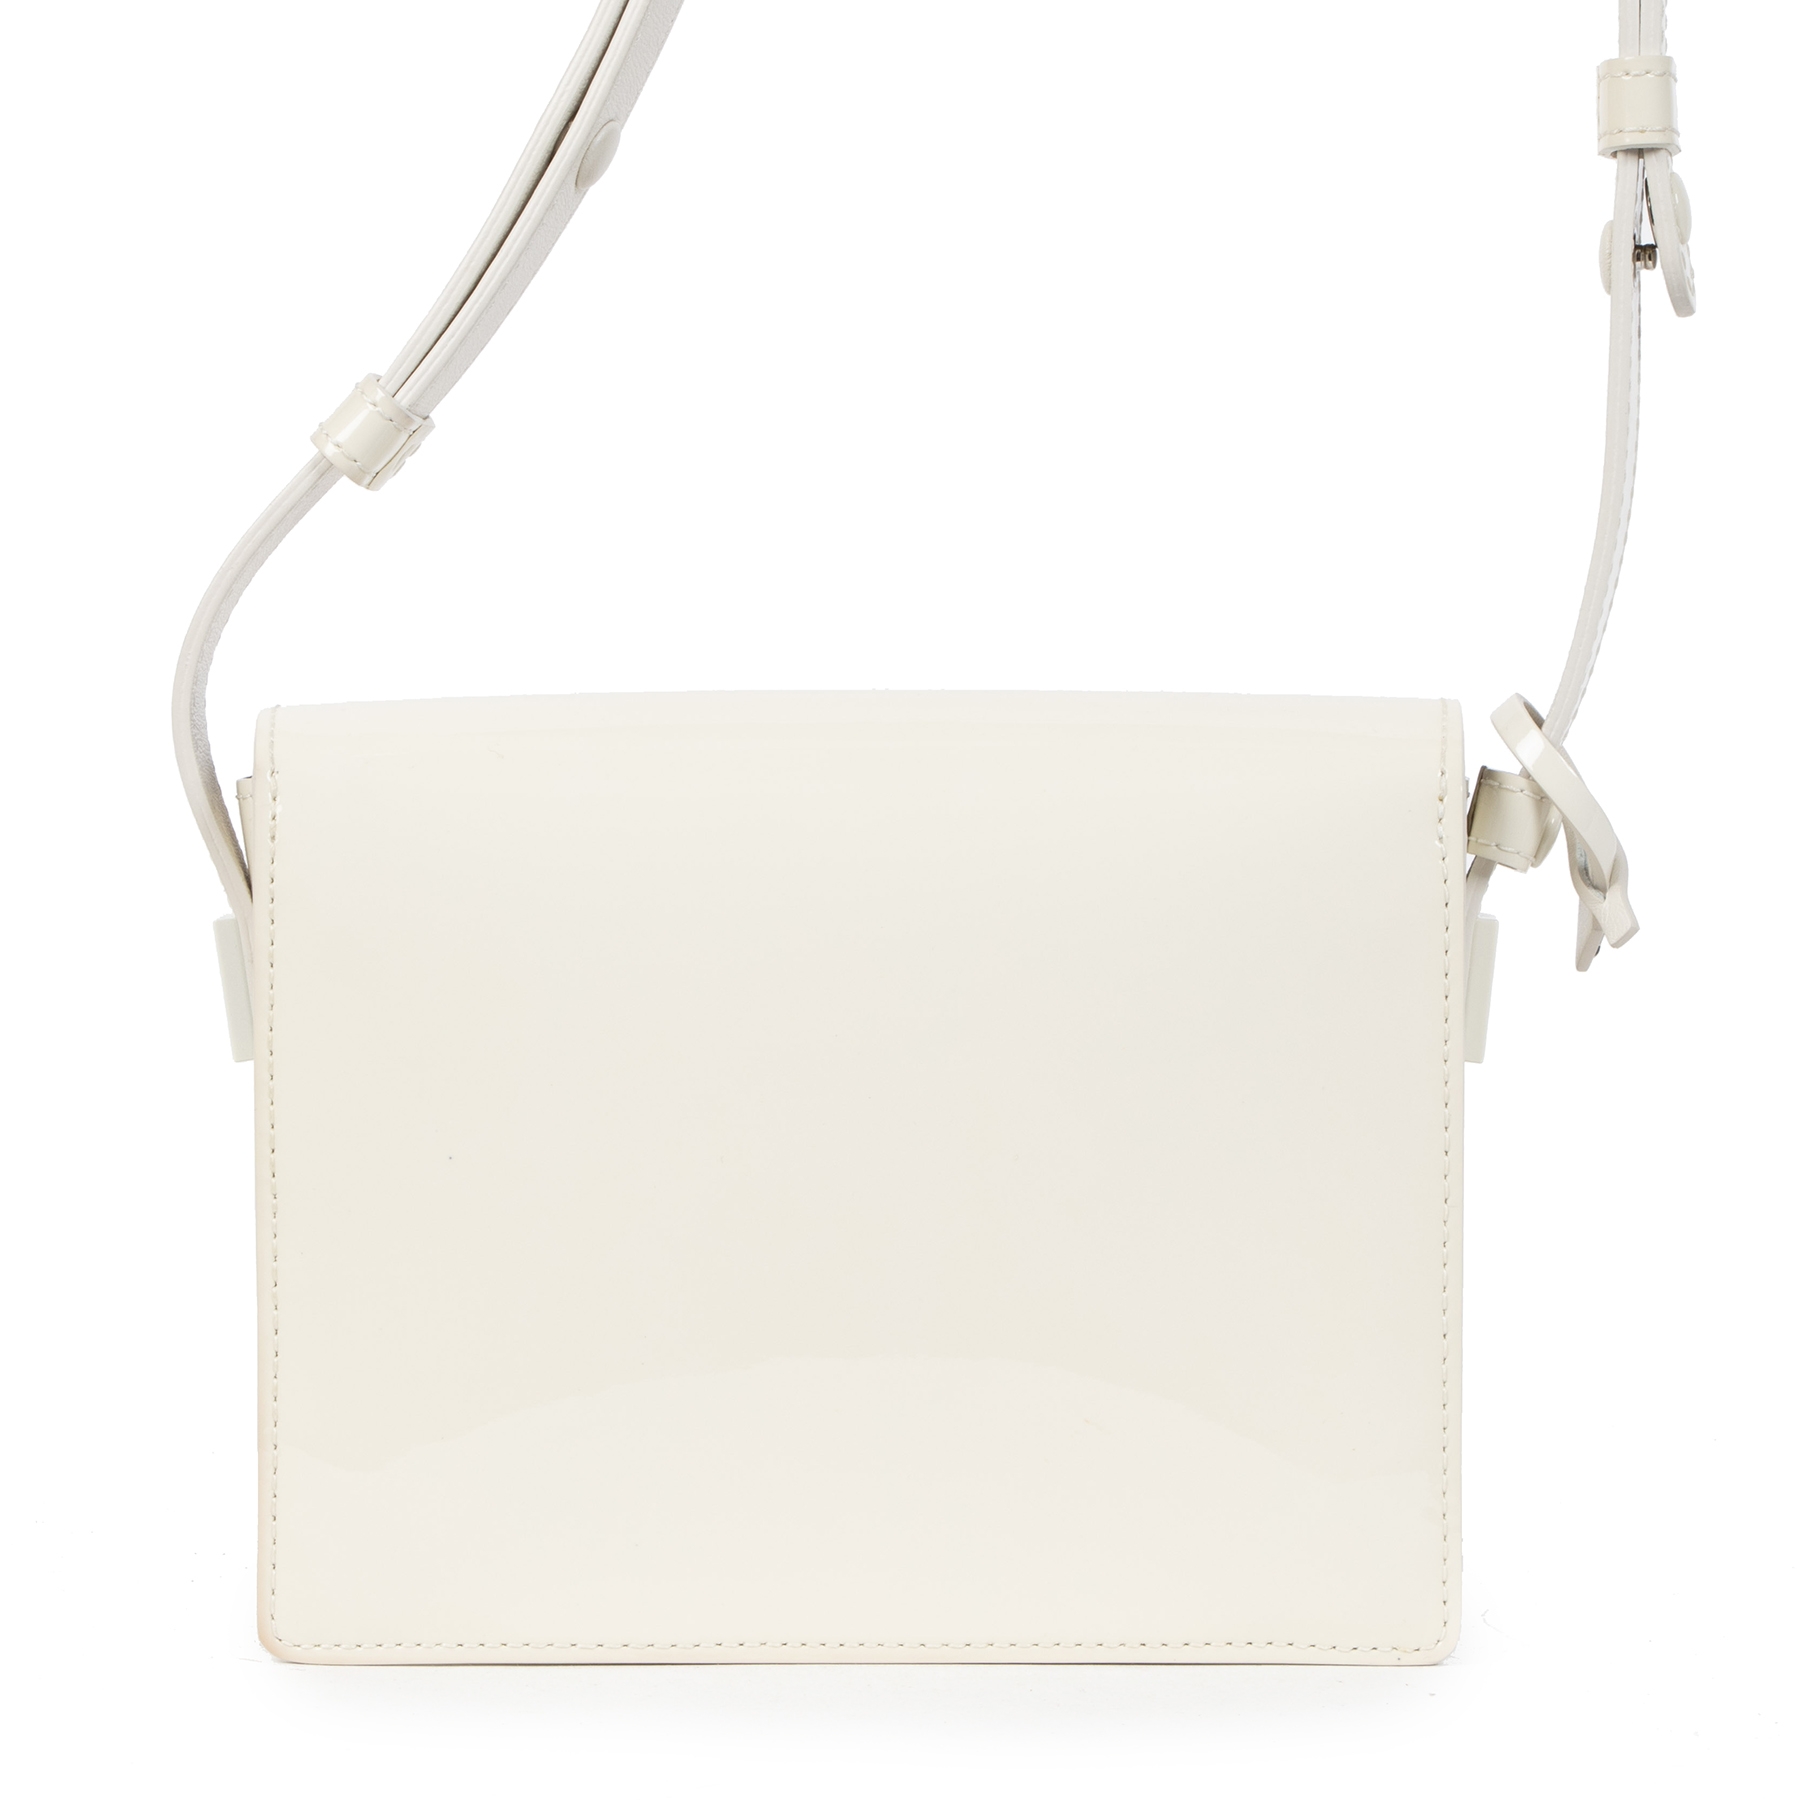 Madame mini leather handbag Delvaux Beige in Leather - 9650873